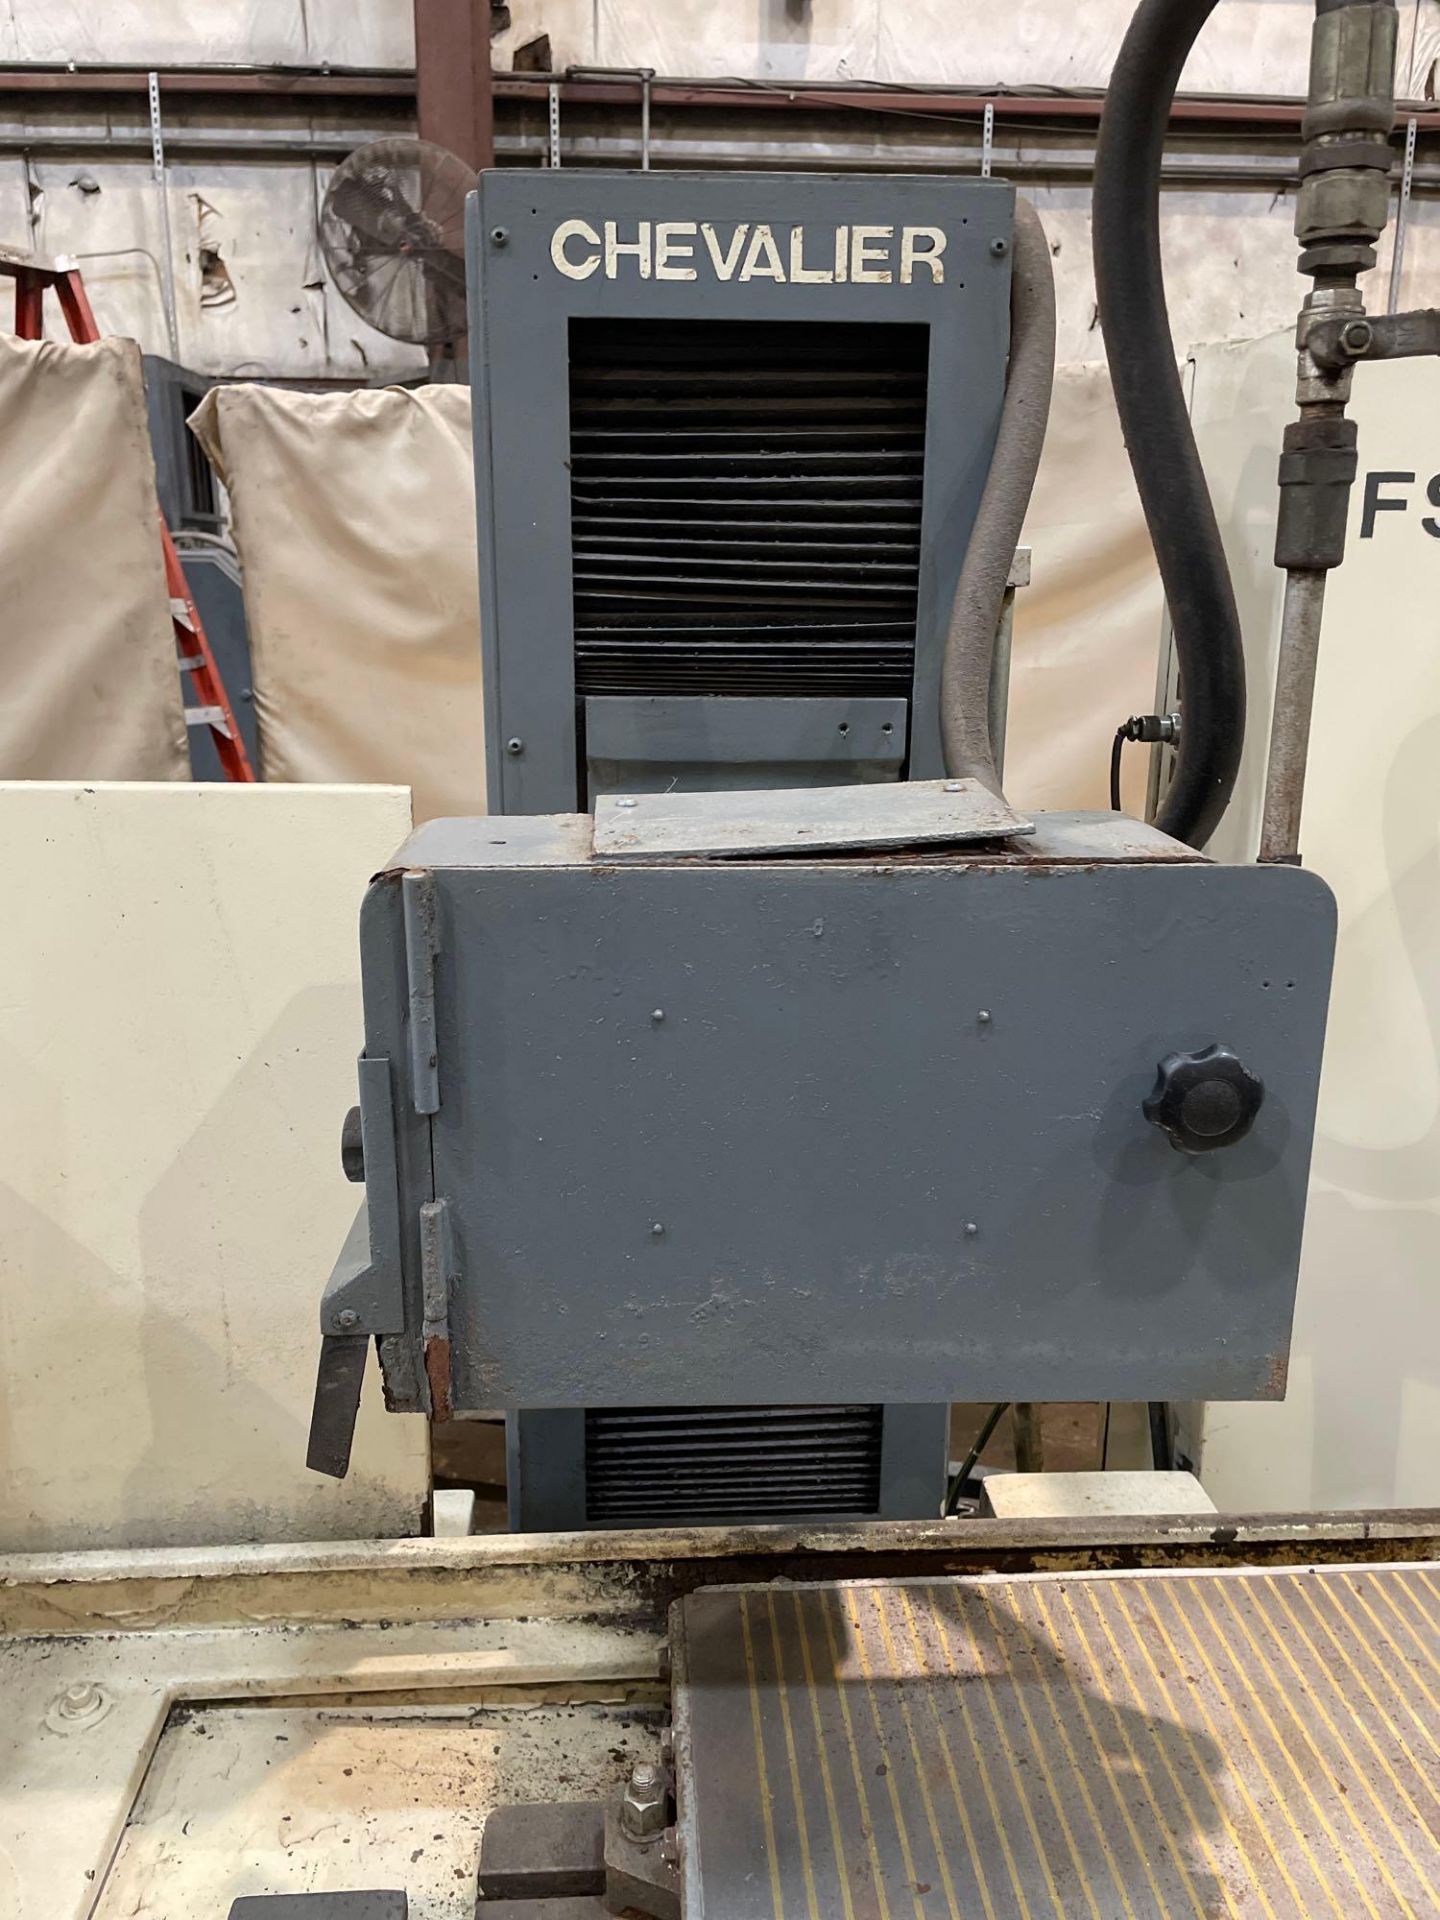 Chevalier FSG-3A1020 10" x 20" Reciprocating Table Surface Grinder - Image 6 of 14